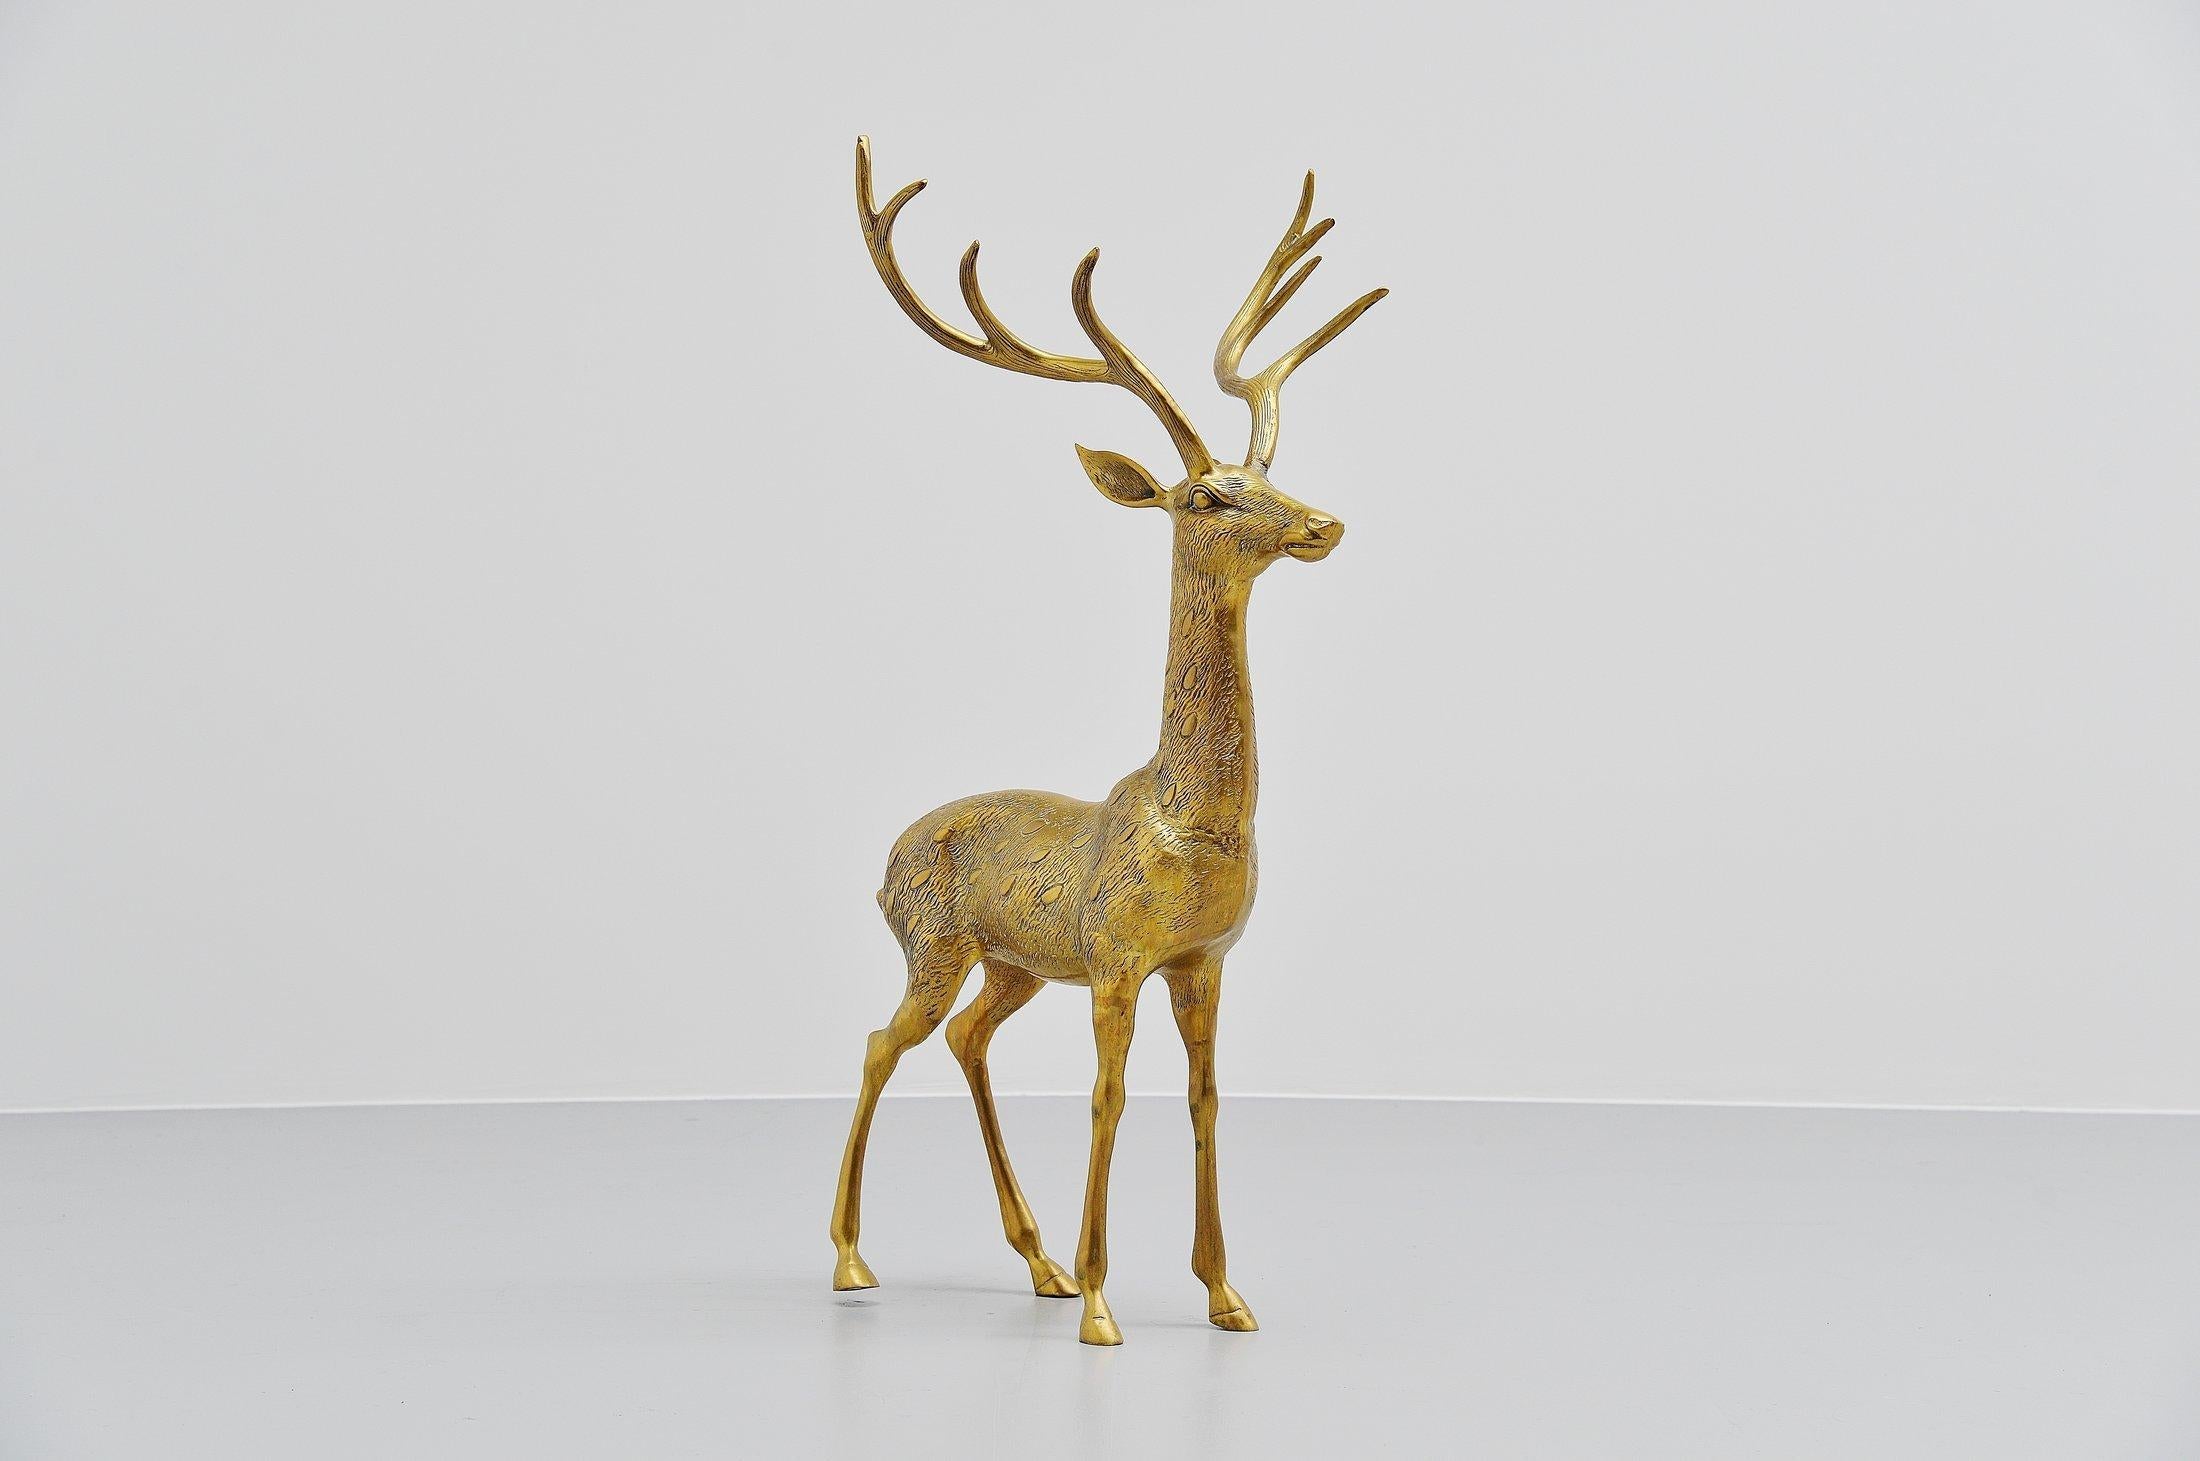 Fantastic oversized bronze deer shaped sculpture made in Italy, 1970. This solid bronze deer is an amazing eye catcher in any home, office or interior. Close to life-size, it doesn't get bigger than this I guess. Very solid bronze in good condition